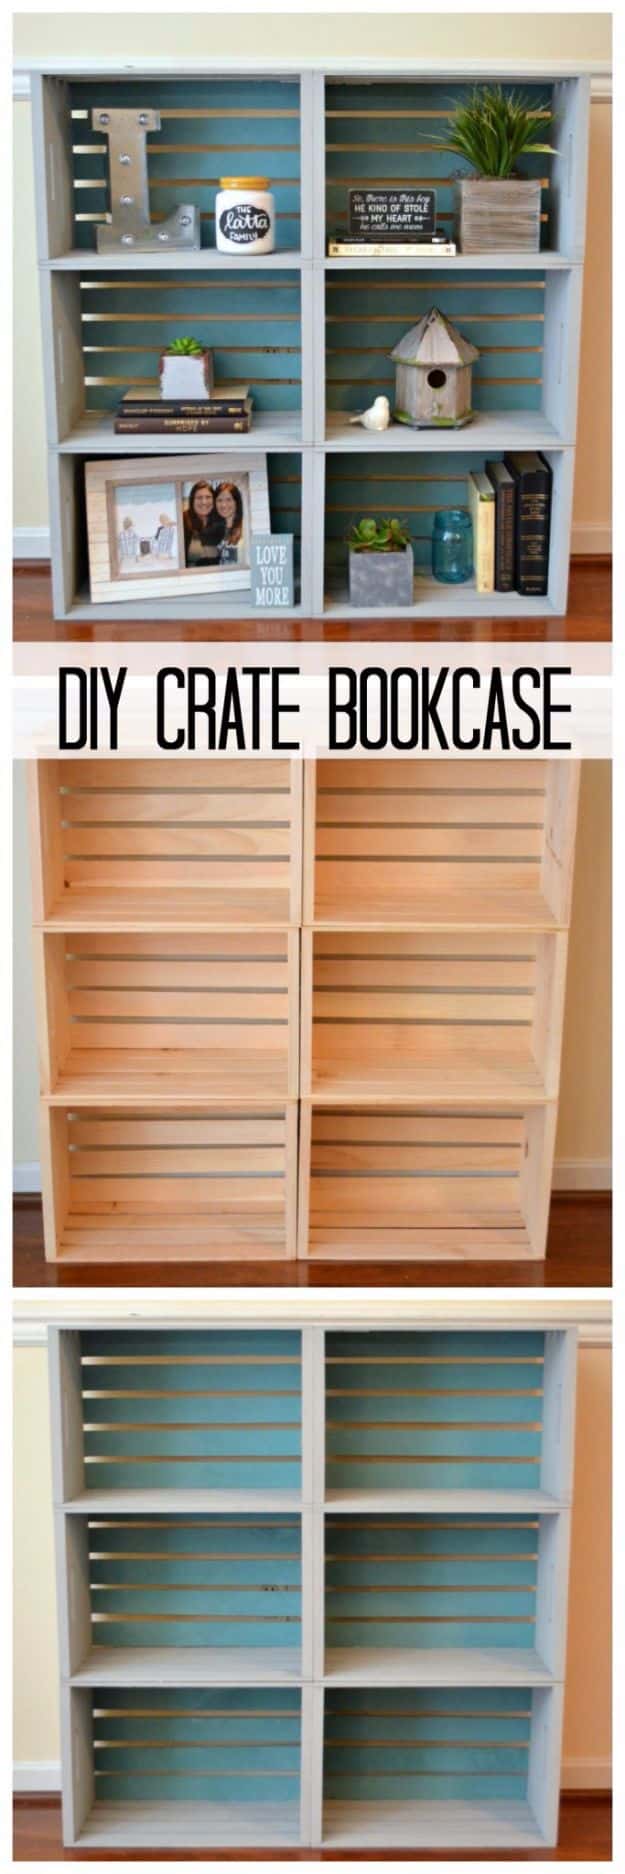 DIY Projects for Readers - DIY Crate Bookcase - Book Storage, Bookmarks, Cool Bookshelves, Creative Projects Made With Books and For Book Lovers - Reading Lights, Bedside Table Ideas - Easy Crafts and DIY Ideas by DIY JOY